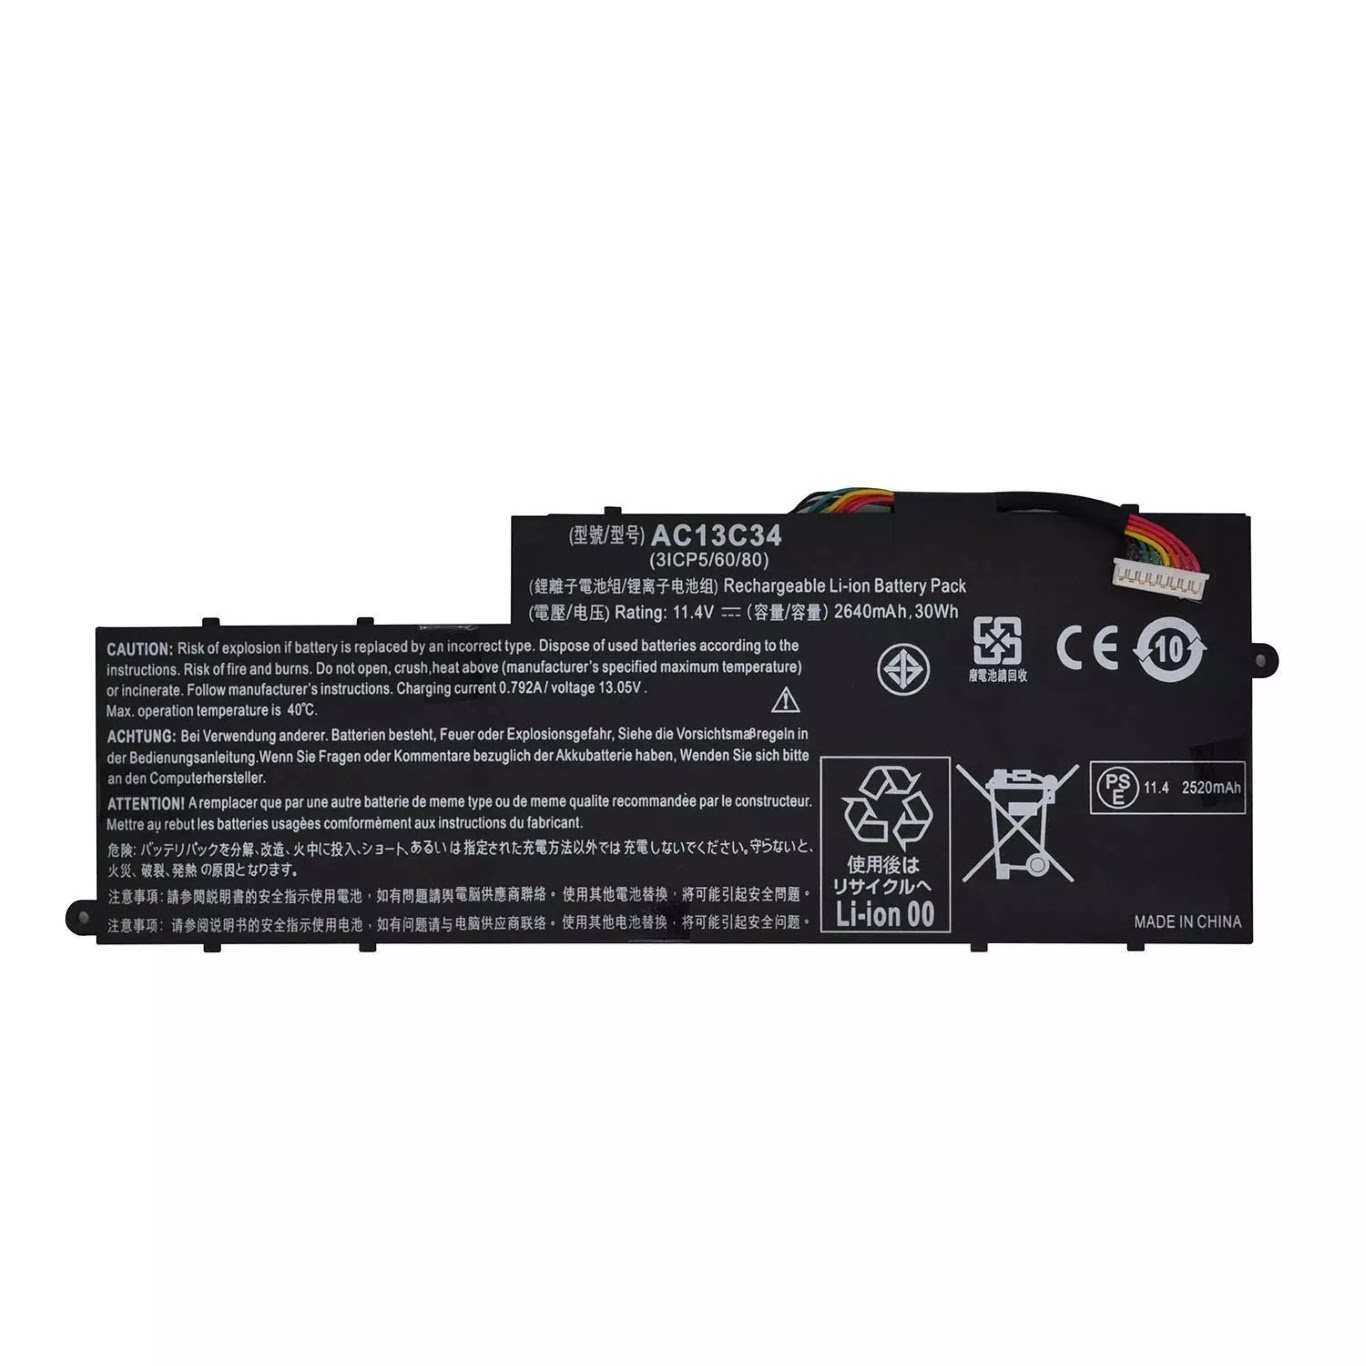 3ICP5/60/80, AC13C34 replacement Laptop Battery for Acer Aspire E3-111 Series, Aspire E3-112 Series, 11.4v, 2640mah / 30wh